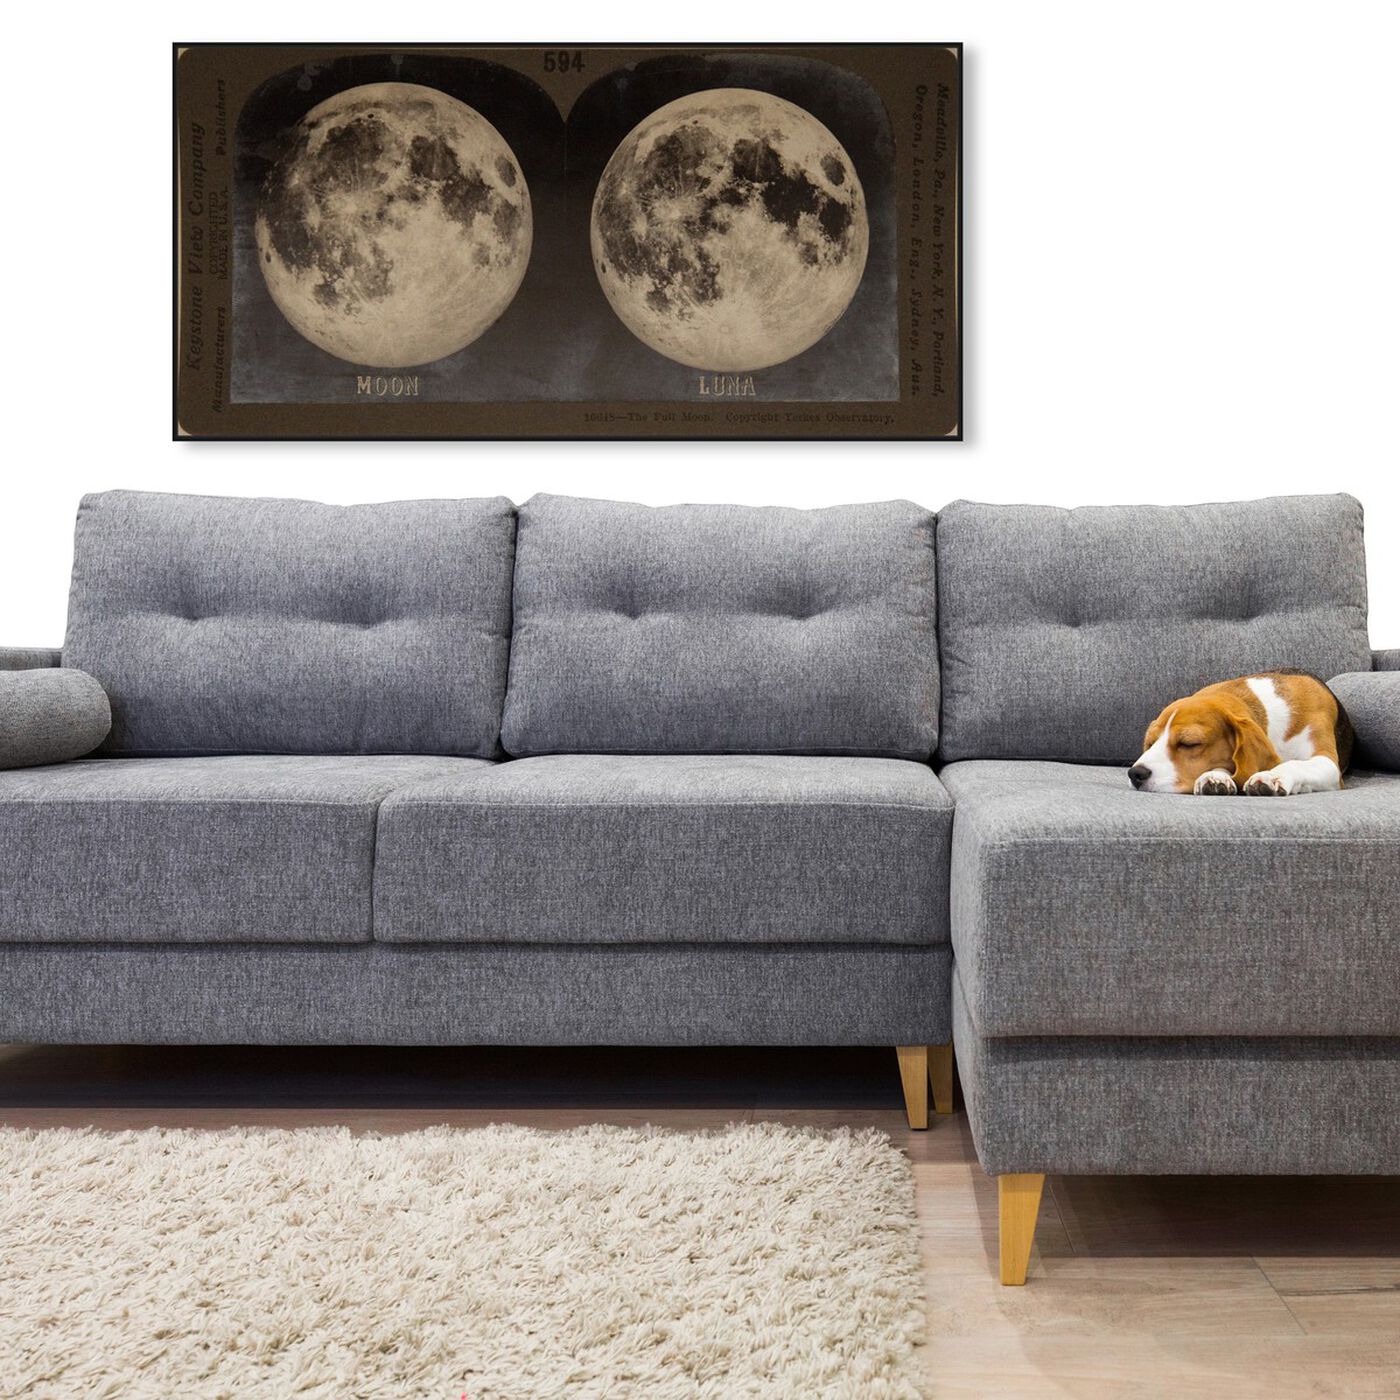 Hanging view of Full Moon featuring astronomy and space and moons art.